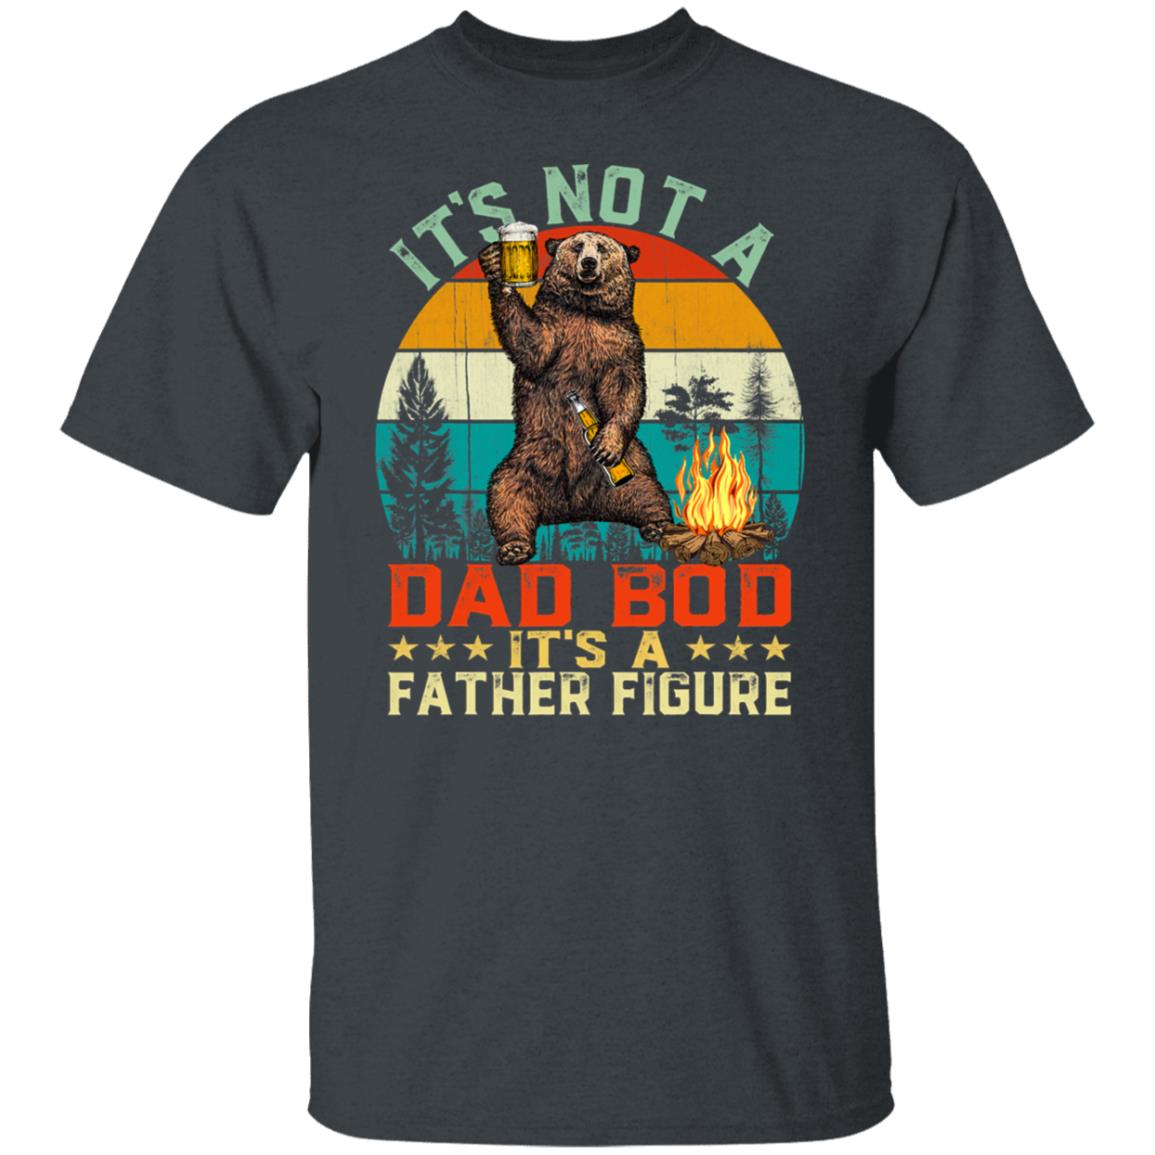 It's Not A Dad Bod It's A Father Figure Funny Bear Vintage Gift Shirt